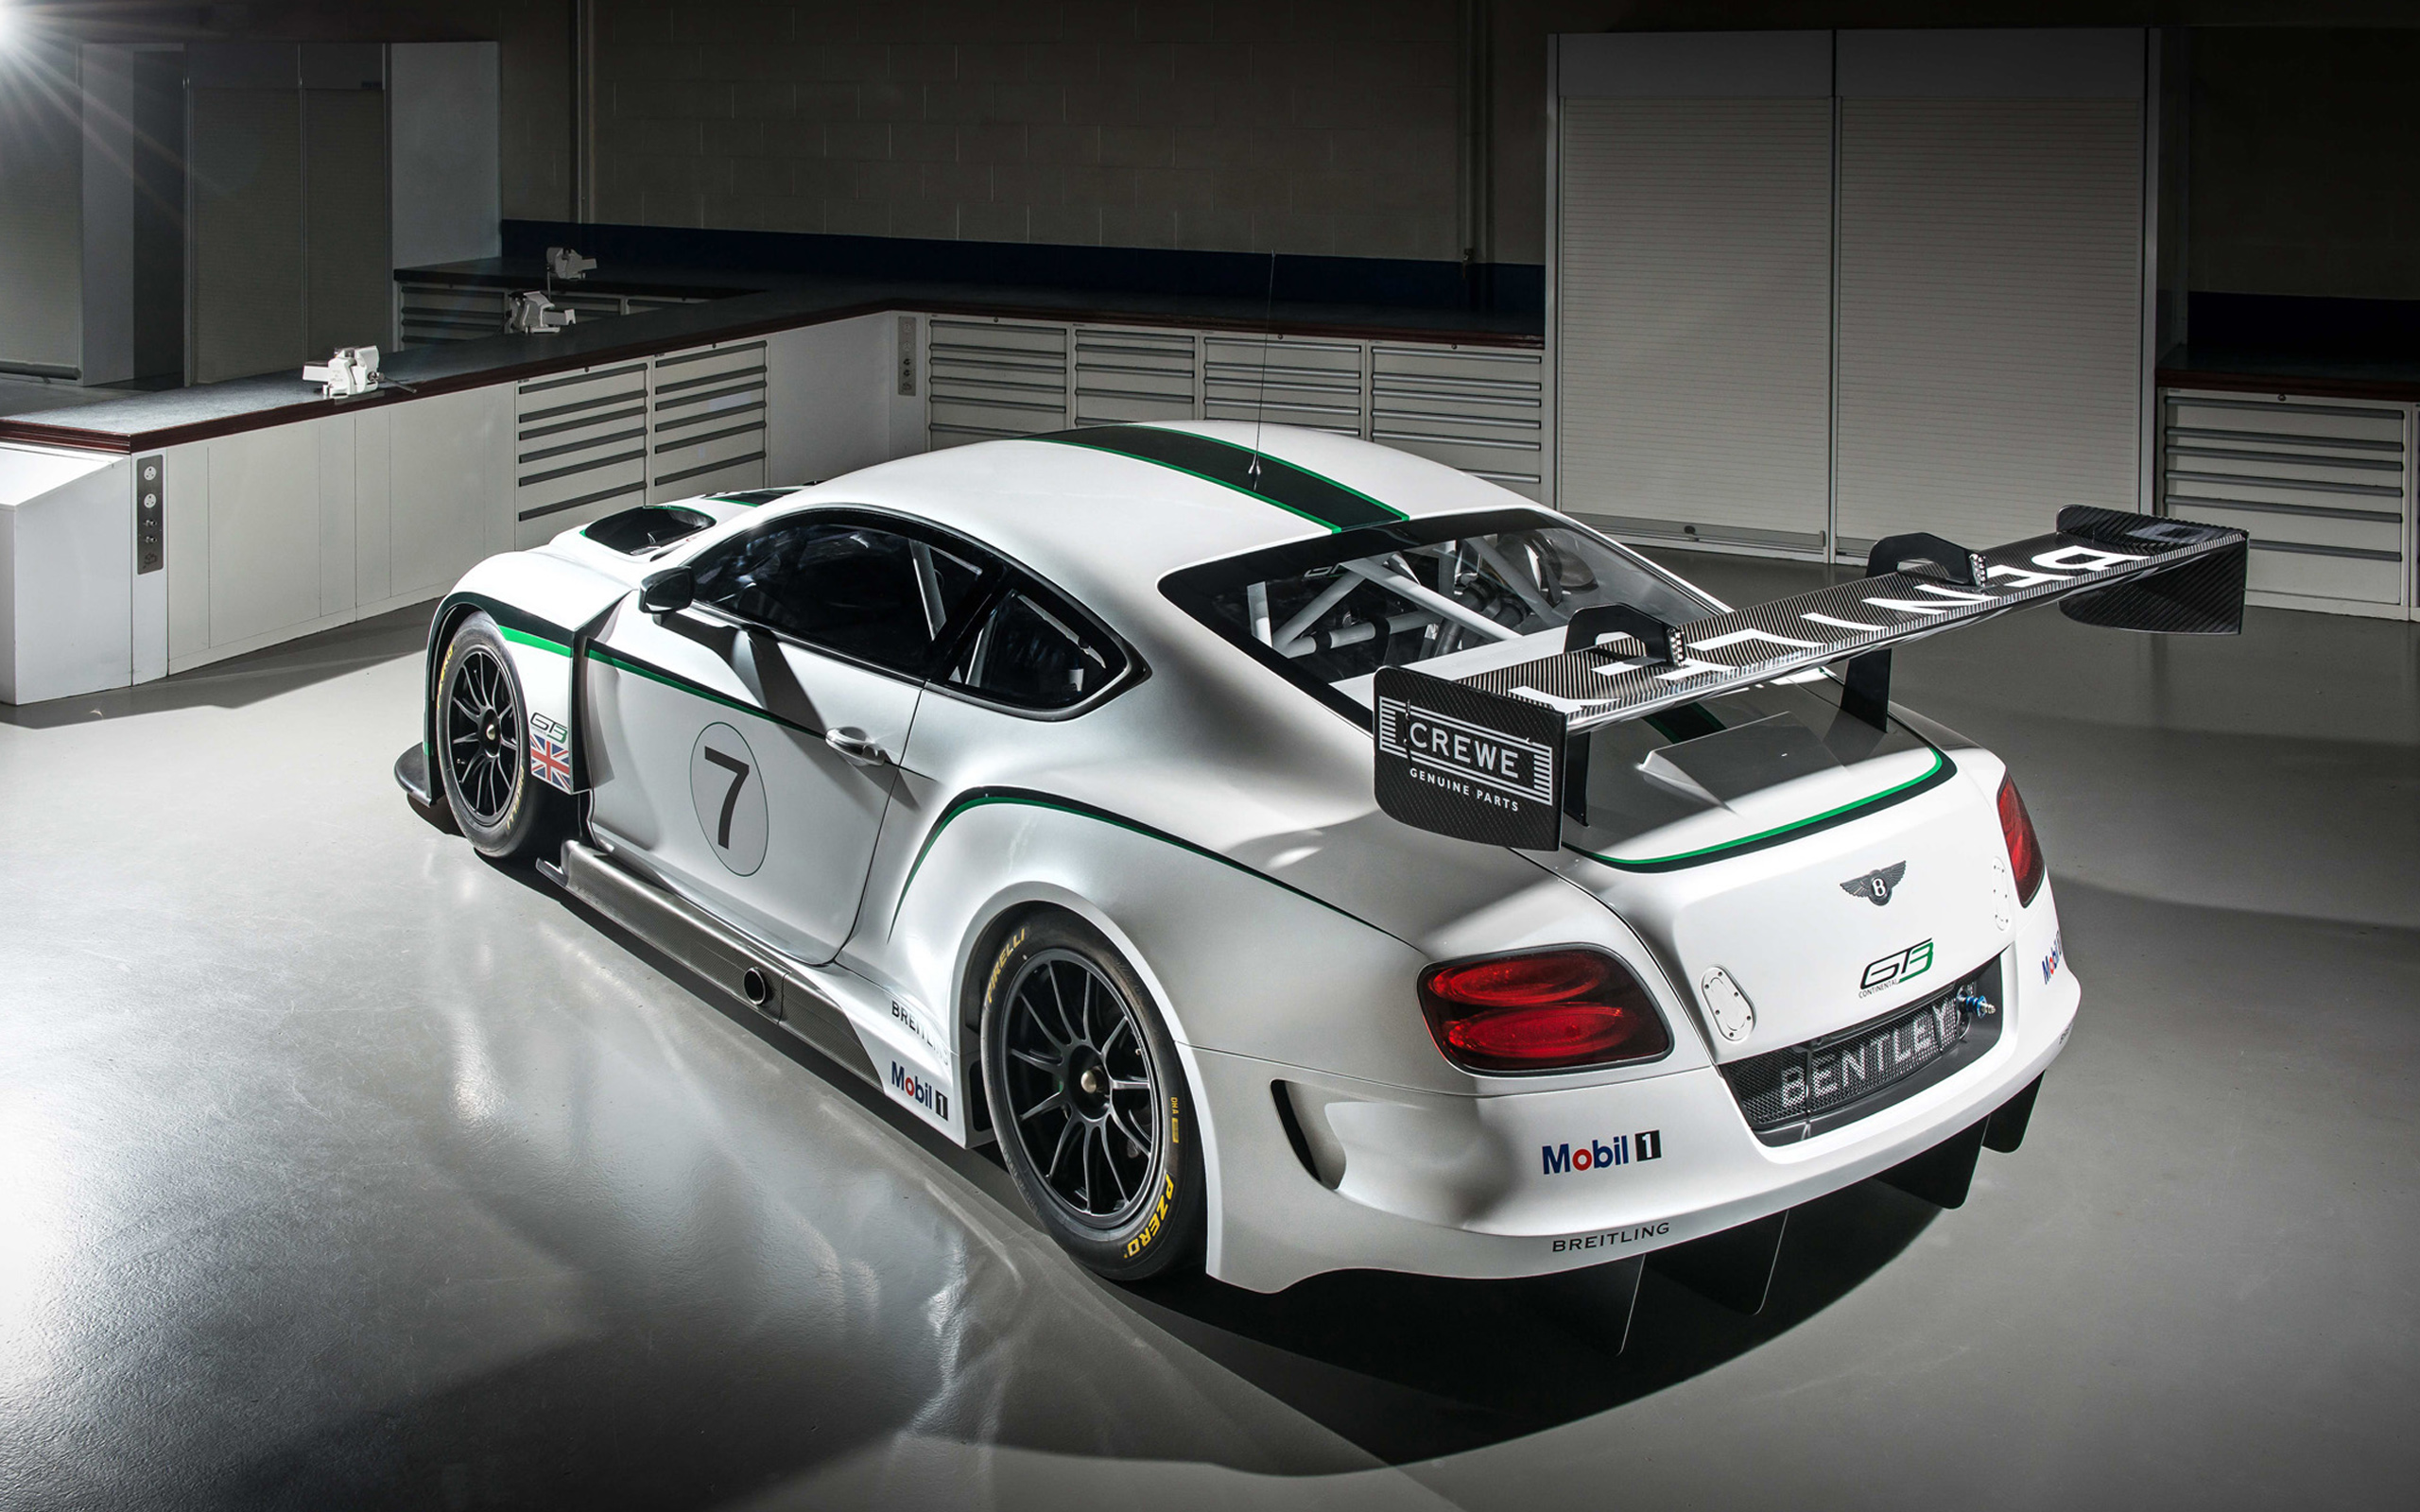 The Ultimate Racing Luxury: The 2018 Bentley Continental GT3